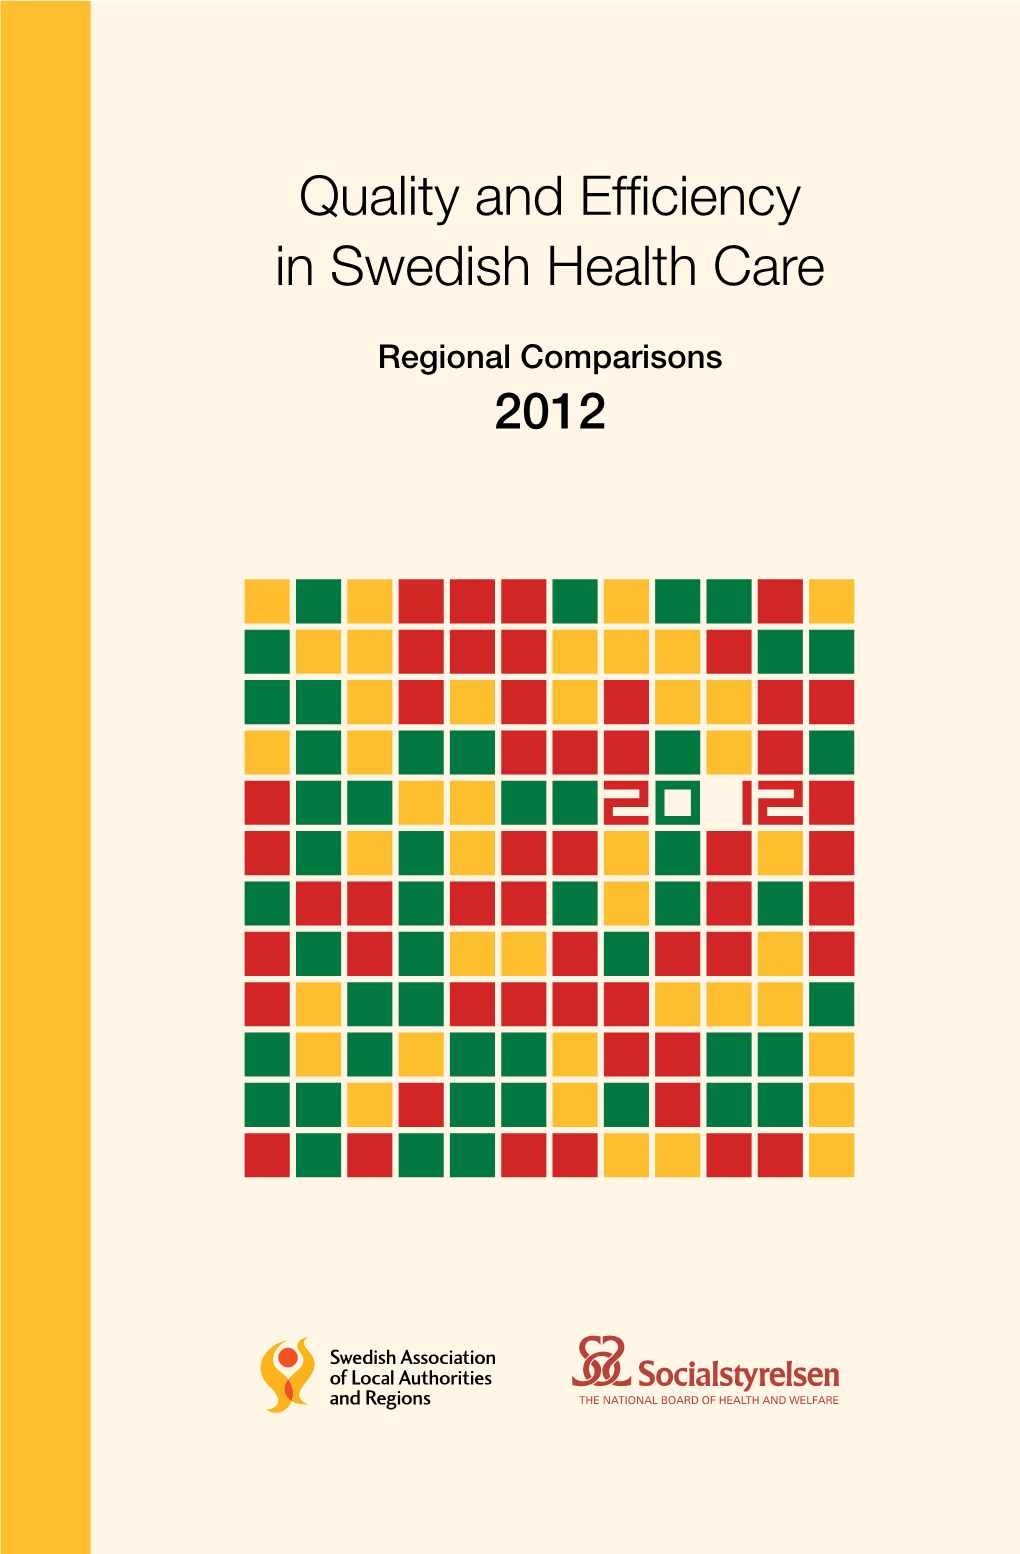 Quality and Efficiency in Swedish Health Care Regional Comparisons 2012 in Swedish Health Care